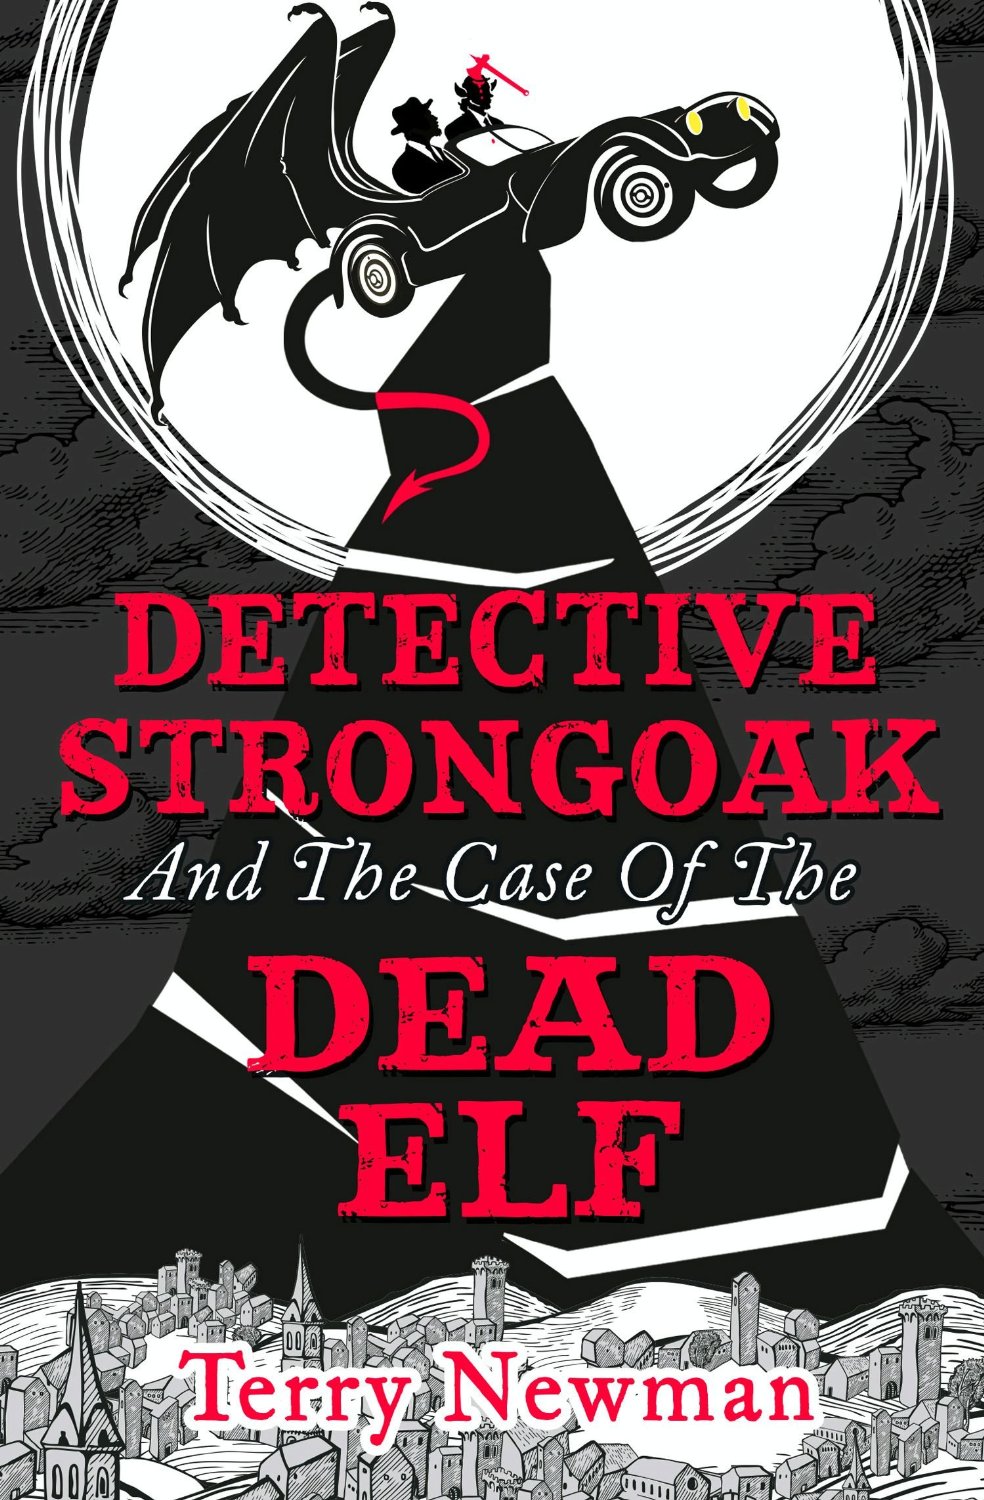 detective-strongoak-and-the-case-of-the-dead-elf_terry-newman